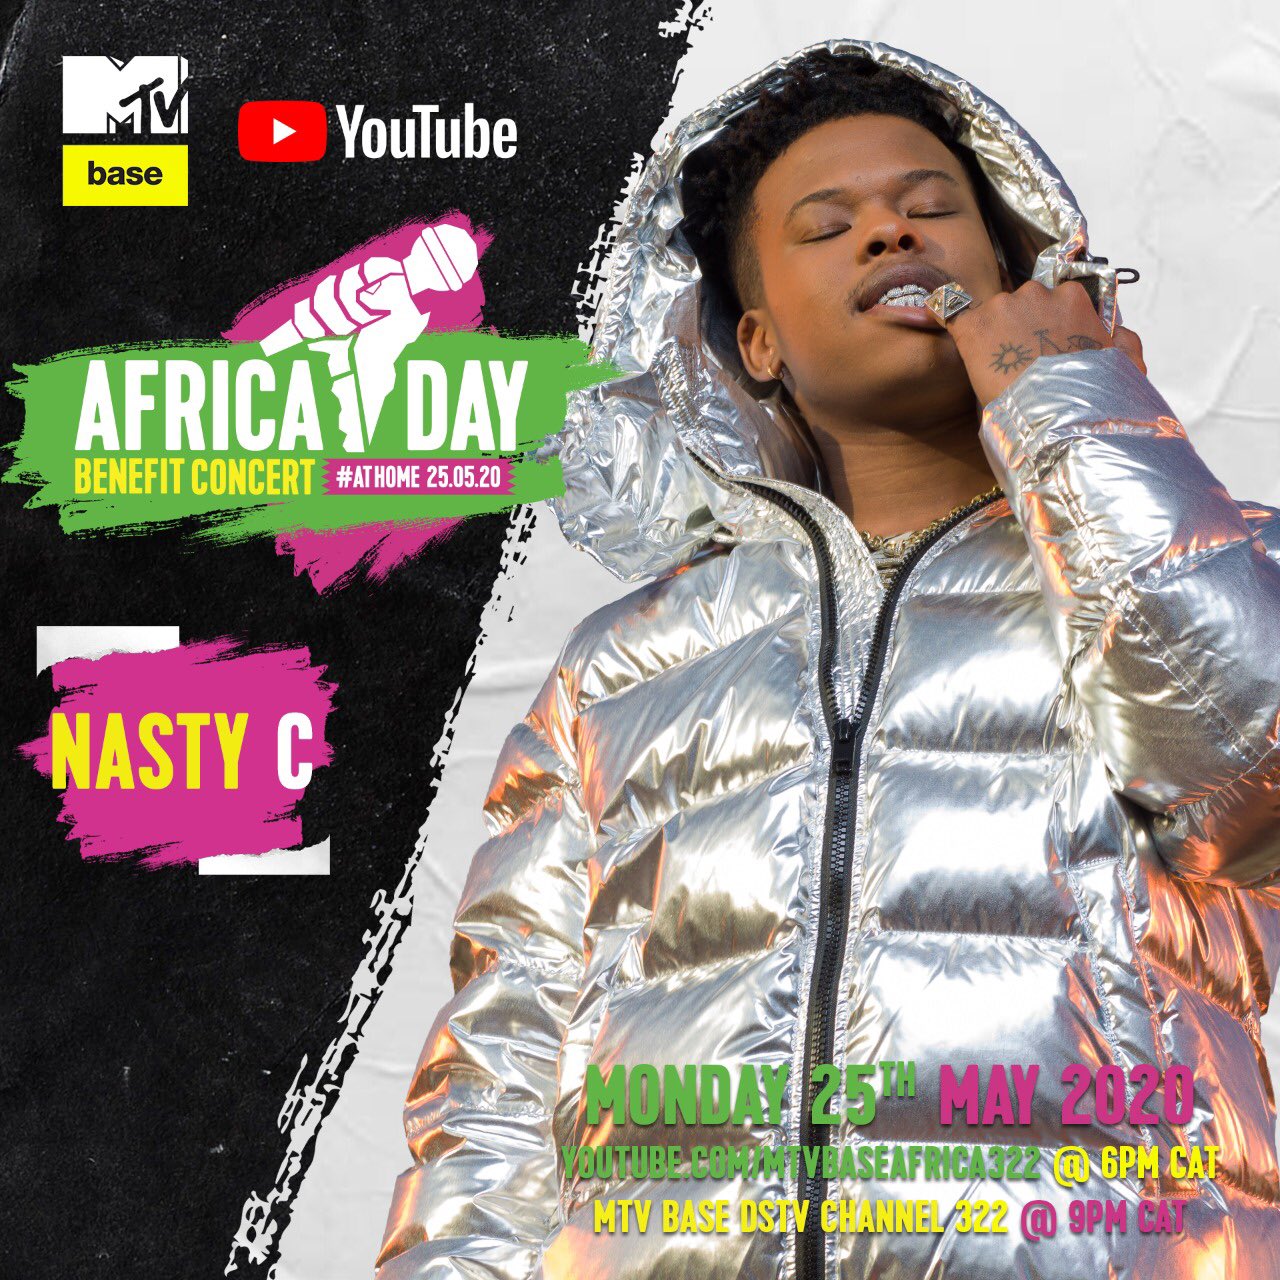 Bebe Cool, Sean Paul, Nasty C, Teni, Sho Madjozi and more to perform in the “Africa Day" Benefit Concert At Home. 4 MUGIBSON